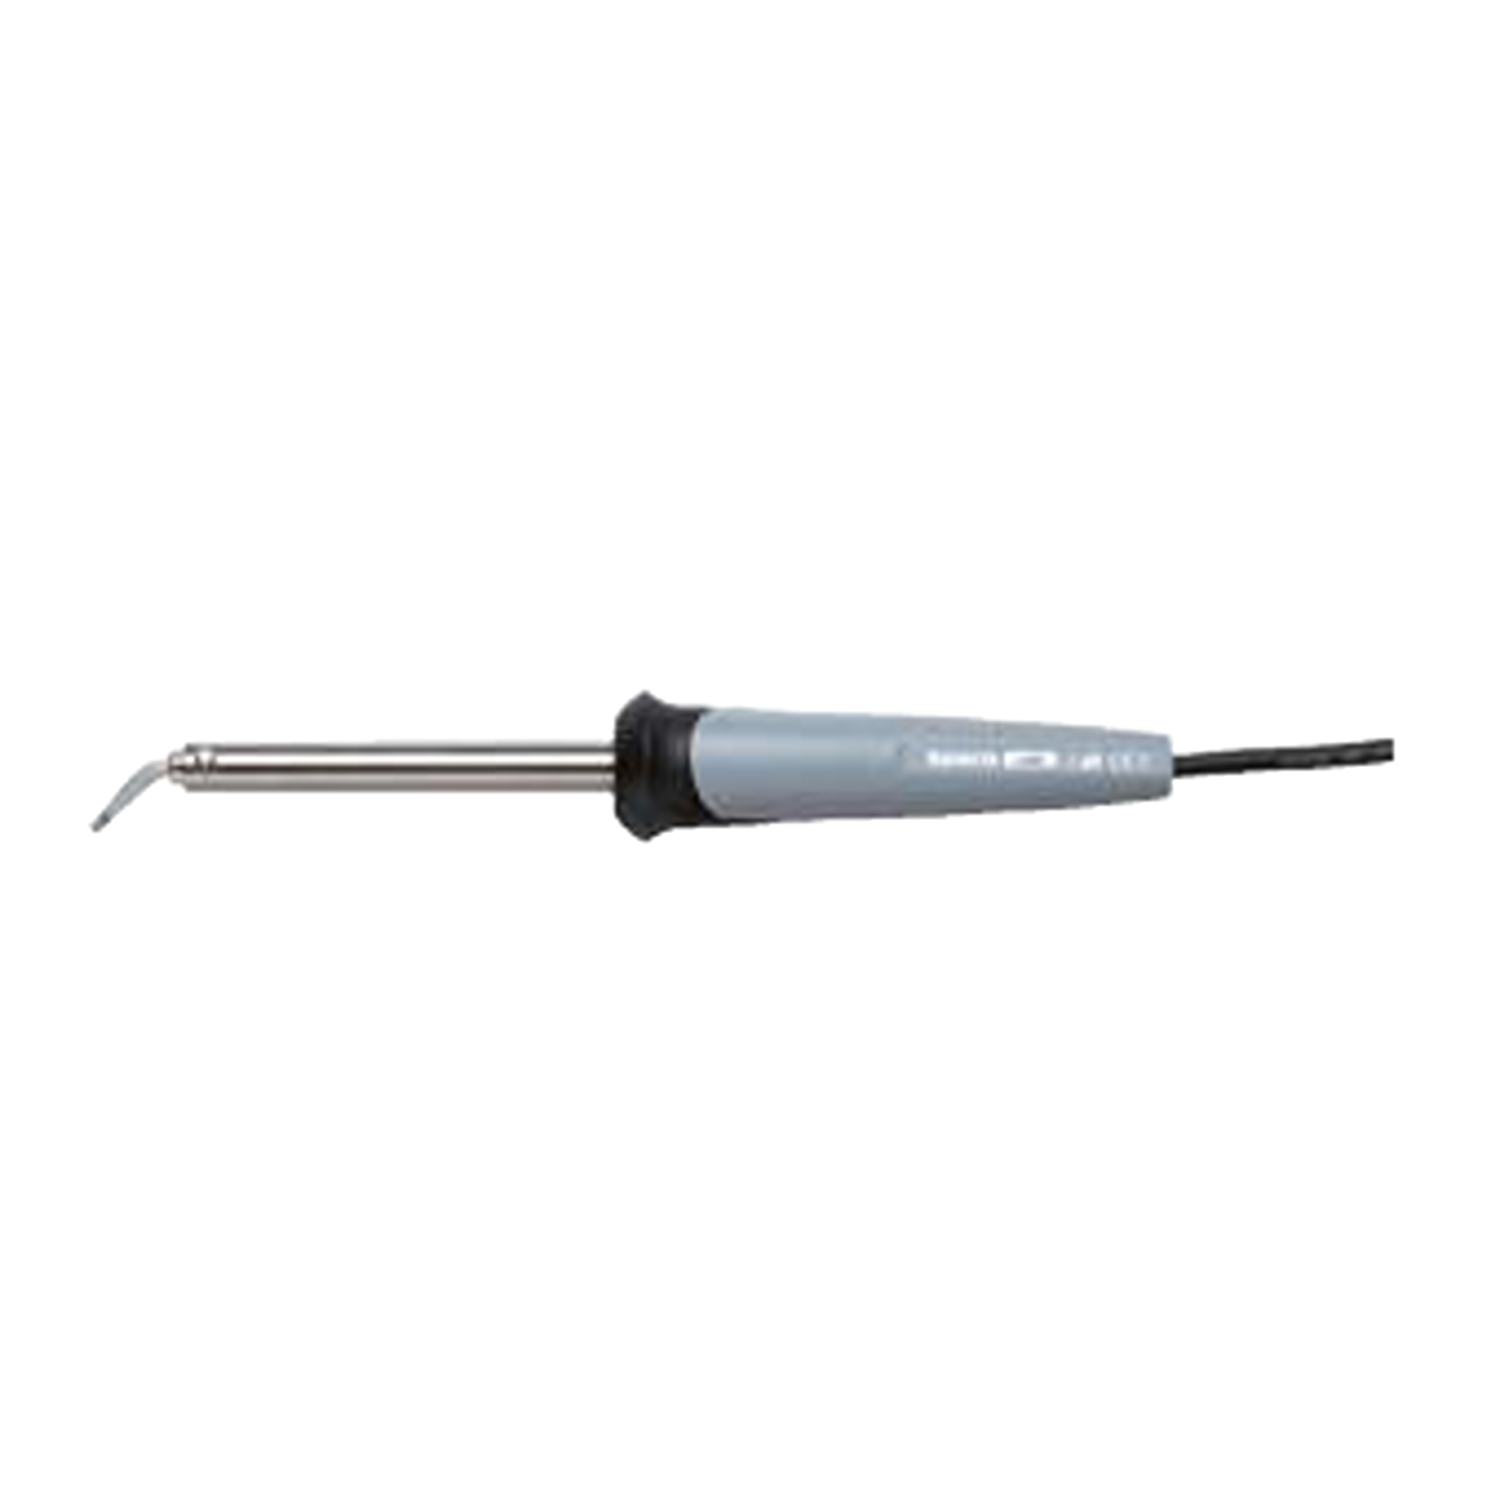 BAHCO 329600 Heavy-Duty Soldering Tools Irons 50 W / 80 W - Premium Soldering Tools from BAHCO - Shop now at Yew Aik.